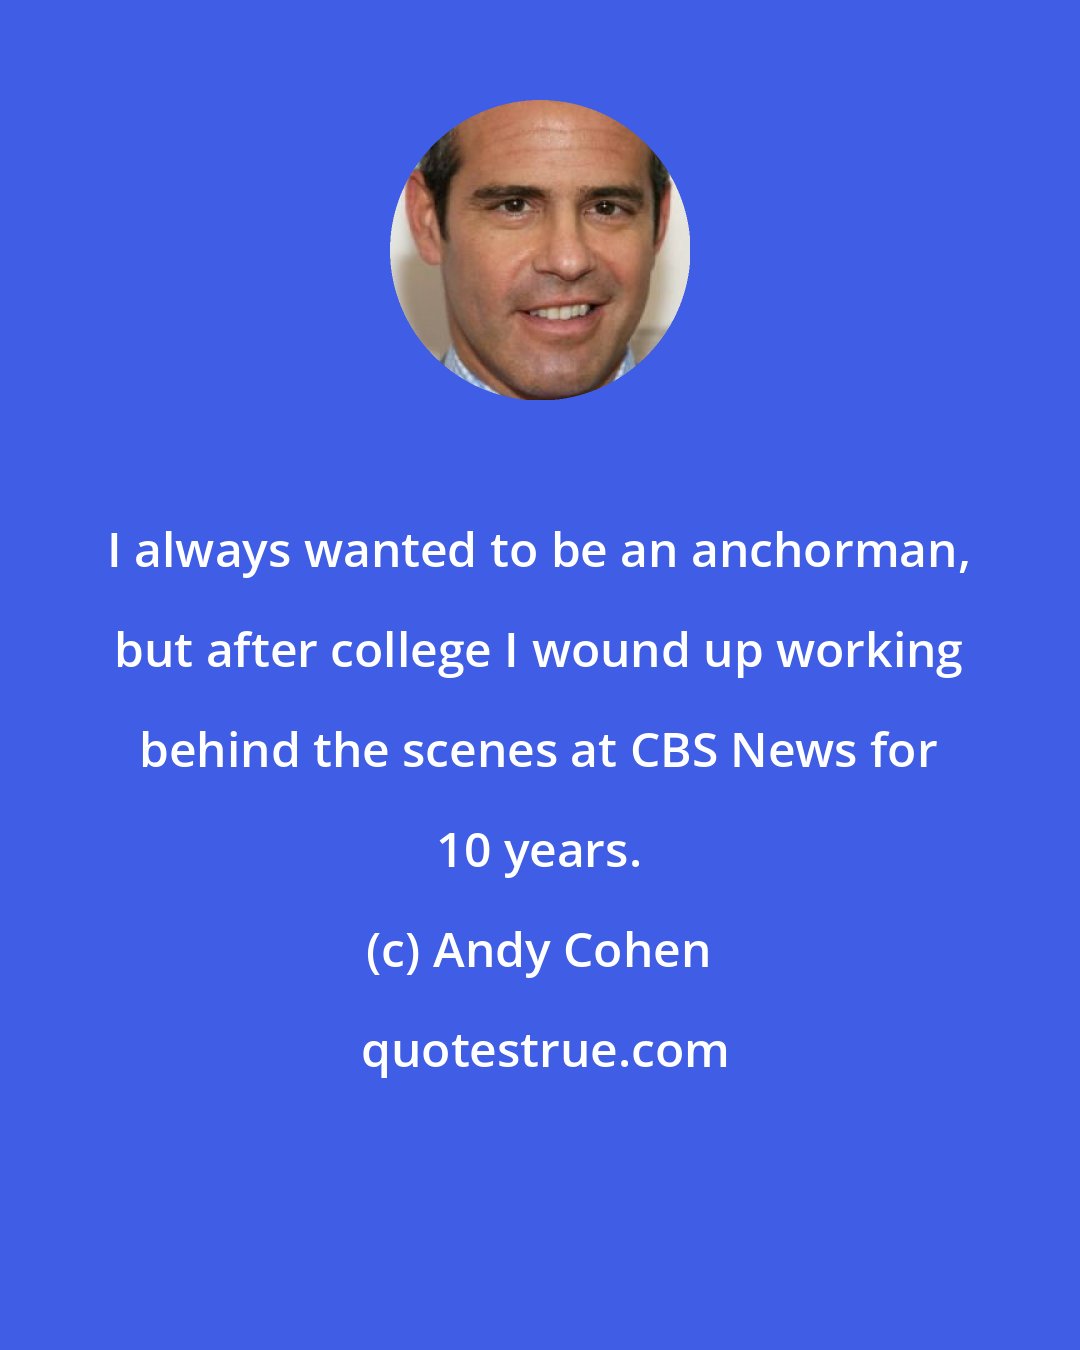 Andy Cohen: I always wanted to be an anchorman, but after college I wound up working behind the scenes at CBS News for 10 years.